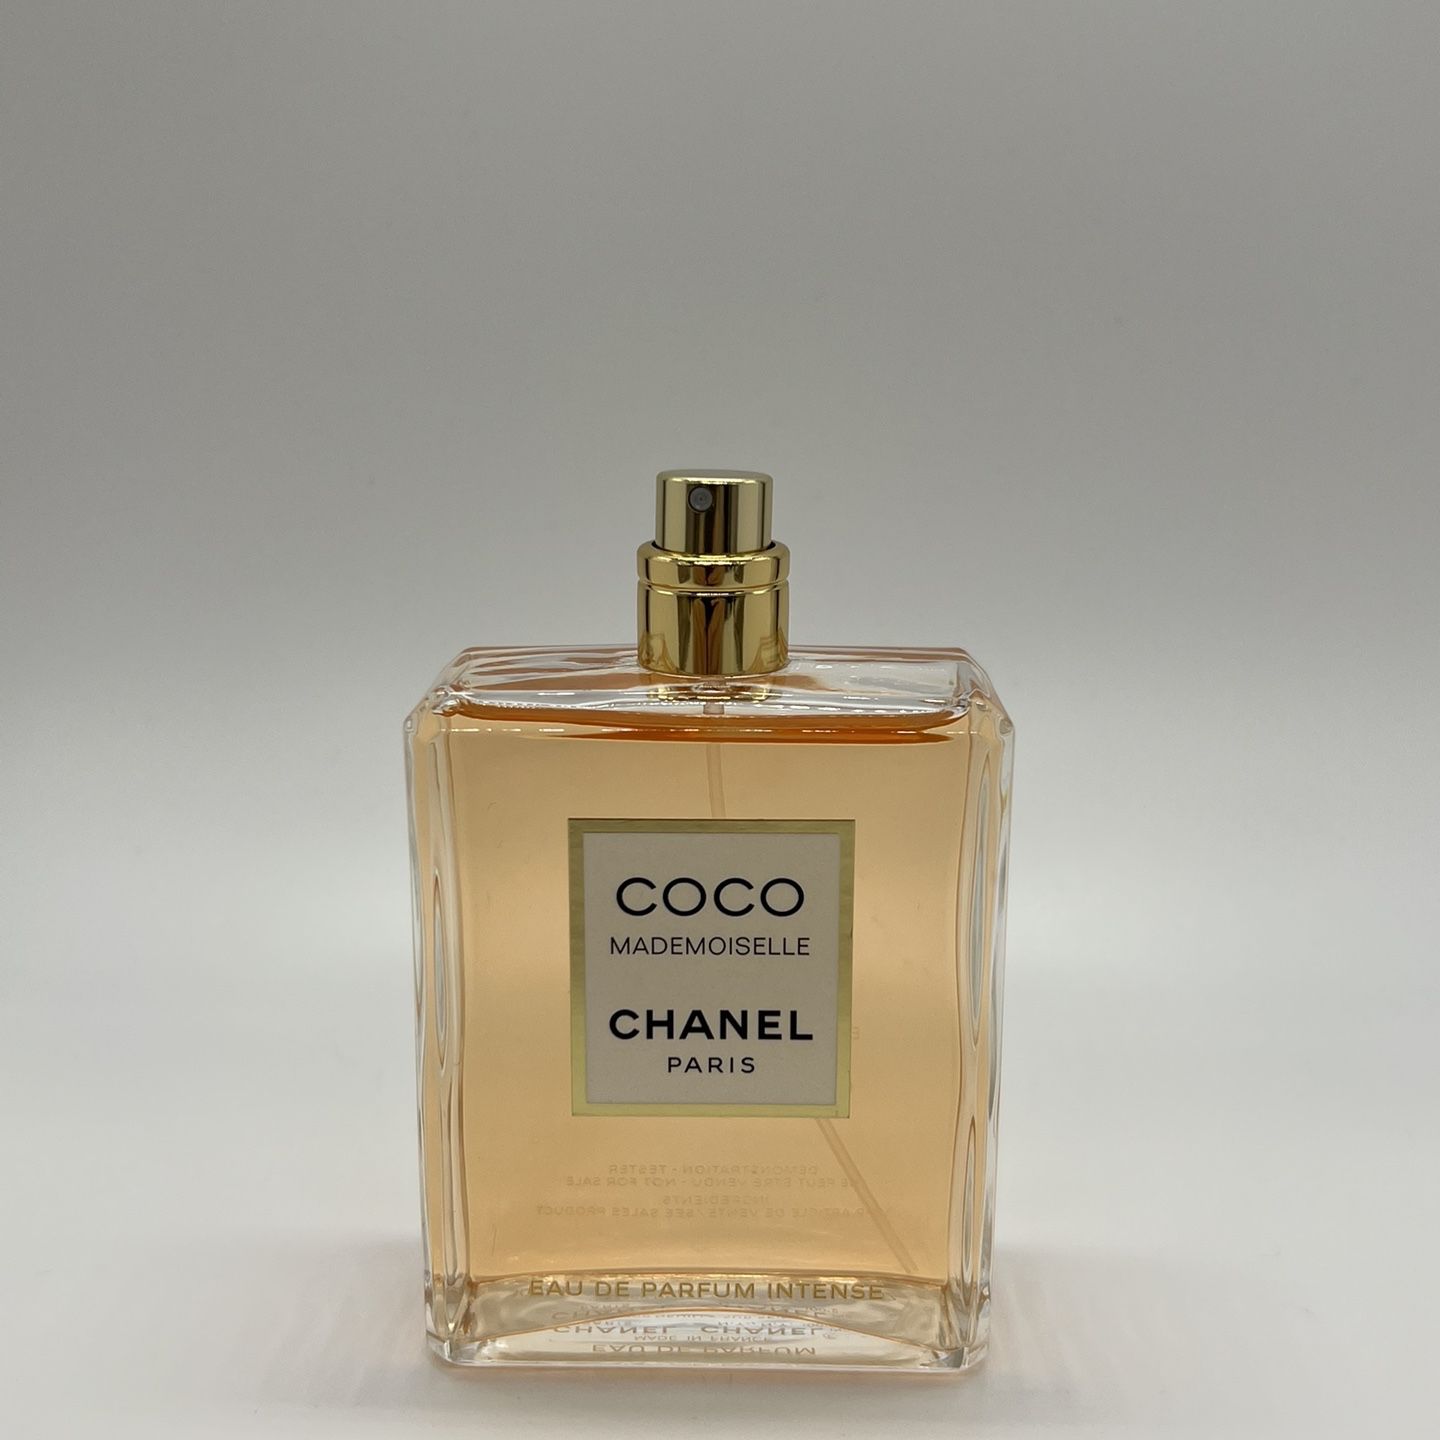 CHANEL COCO EAU DE PARFUM 3.4oz SPRAY w/ Tester Box (BRAND NEW) 100%  AUTHENTIC! READY TO SHIP! WOMEN FRAGRANCE PERFUME (RETAIL $135) for Sale in